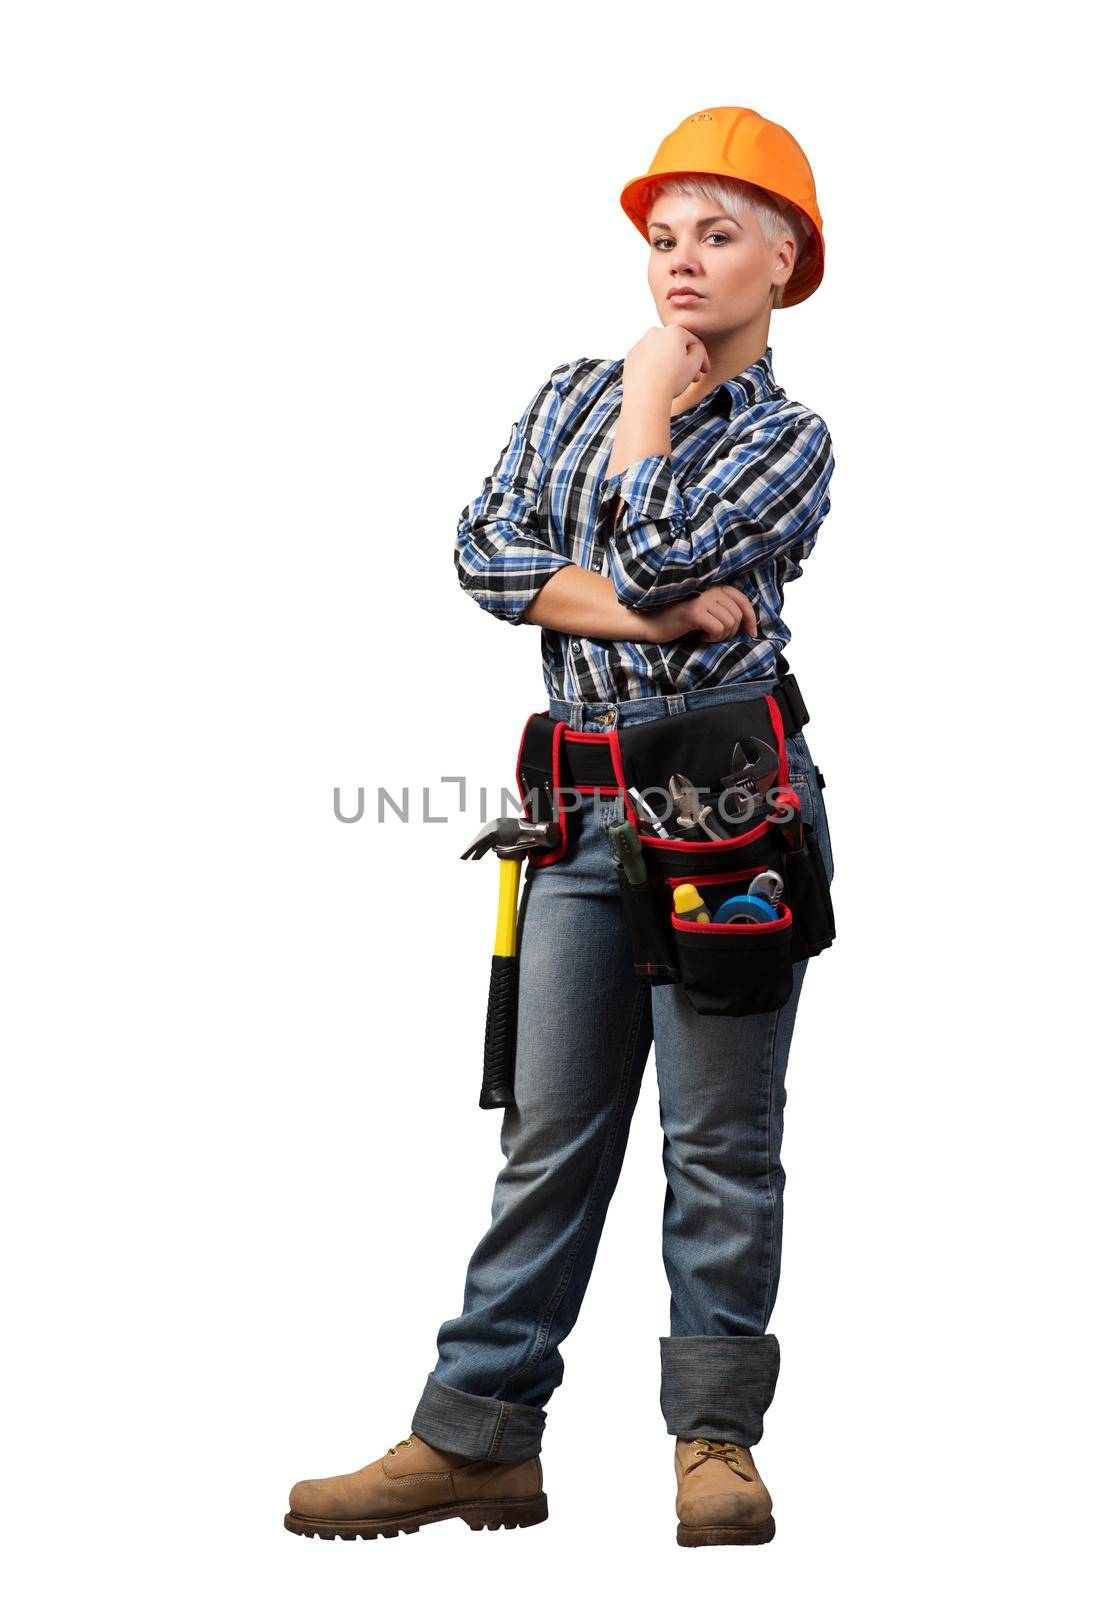 Concentrated female construction worker in hardhat standing with folded arms. Pensive young technician in checkered blue shirt isolated on white background. Industrial manufacturing and construction